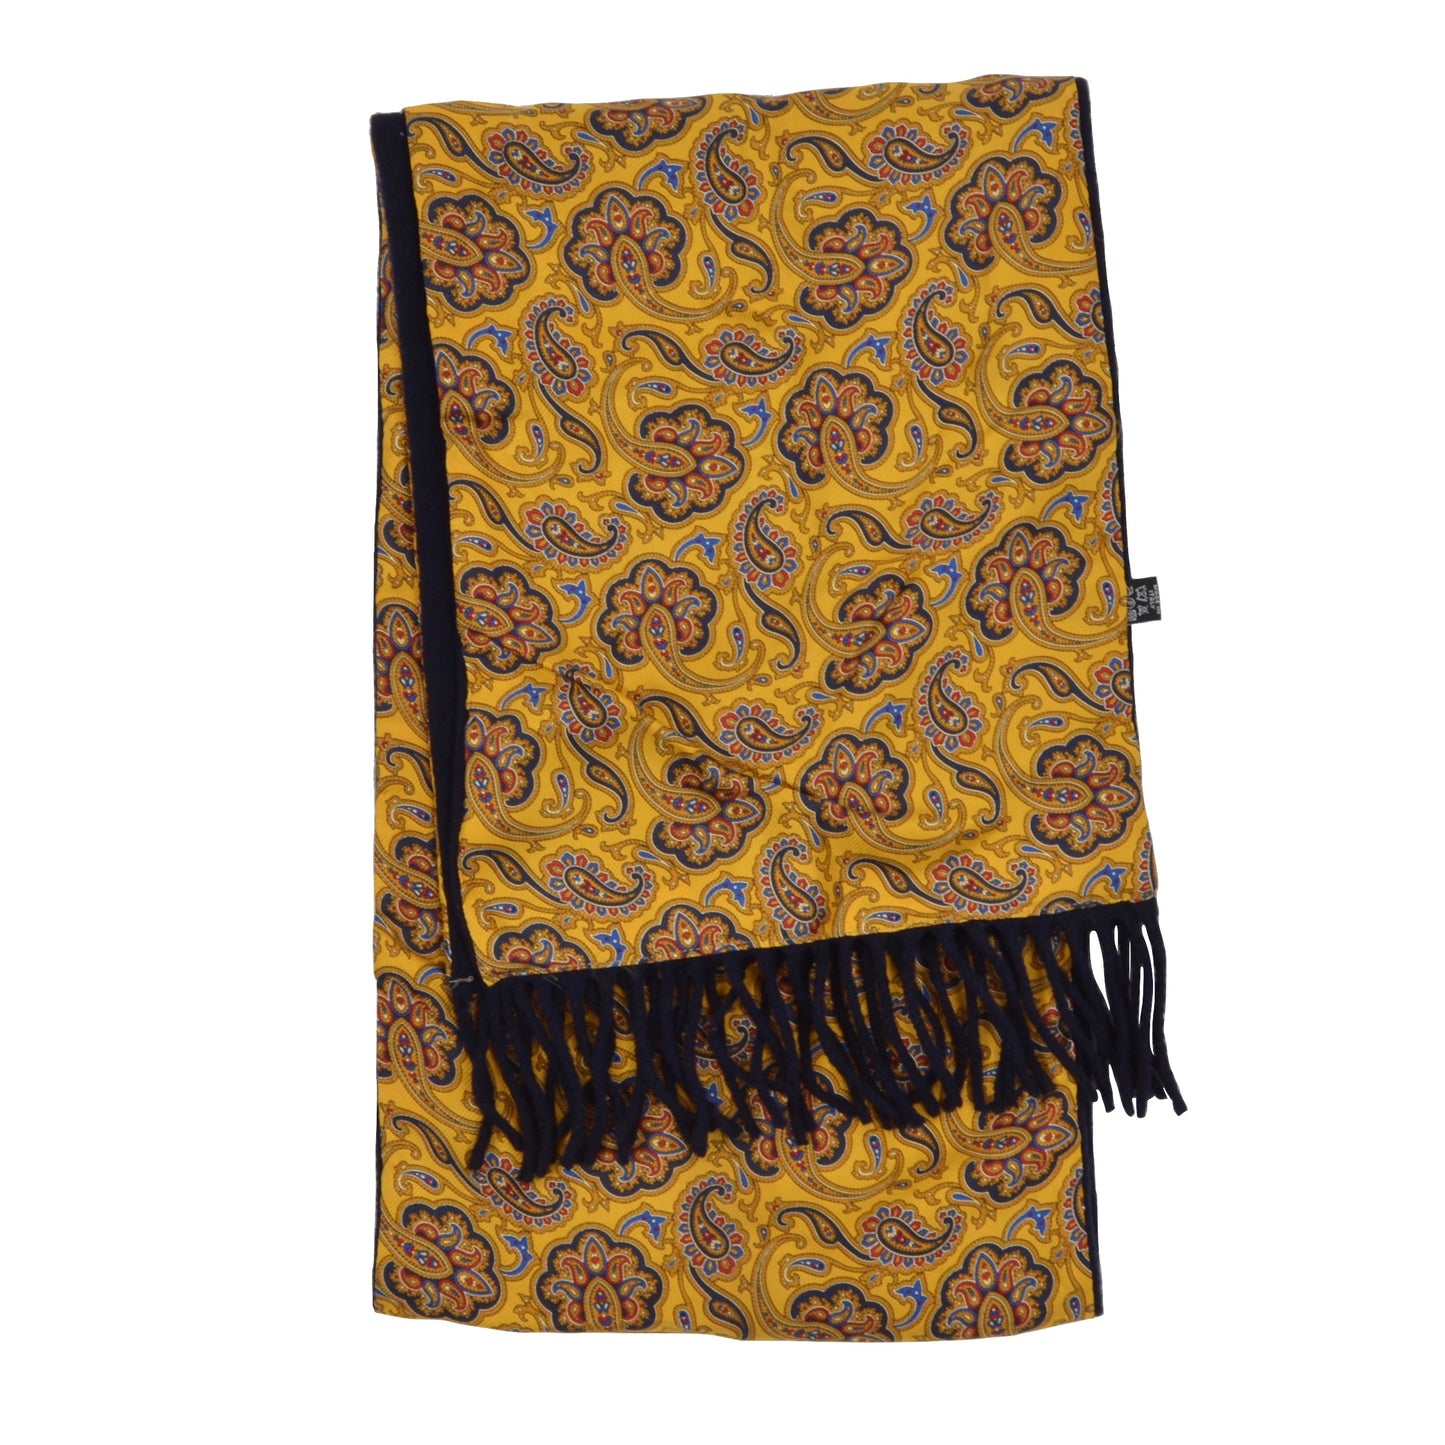 Classic Double-Sided Silk/Wool Dress Scarf - Yellow Paisley/Navy